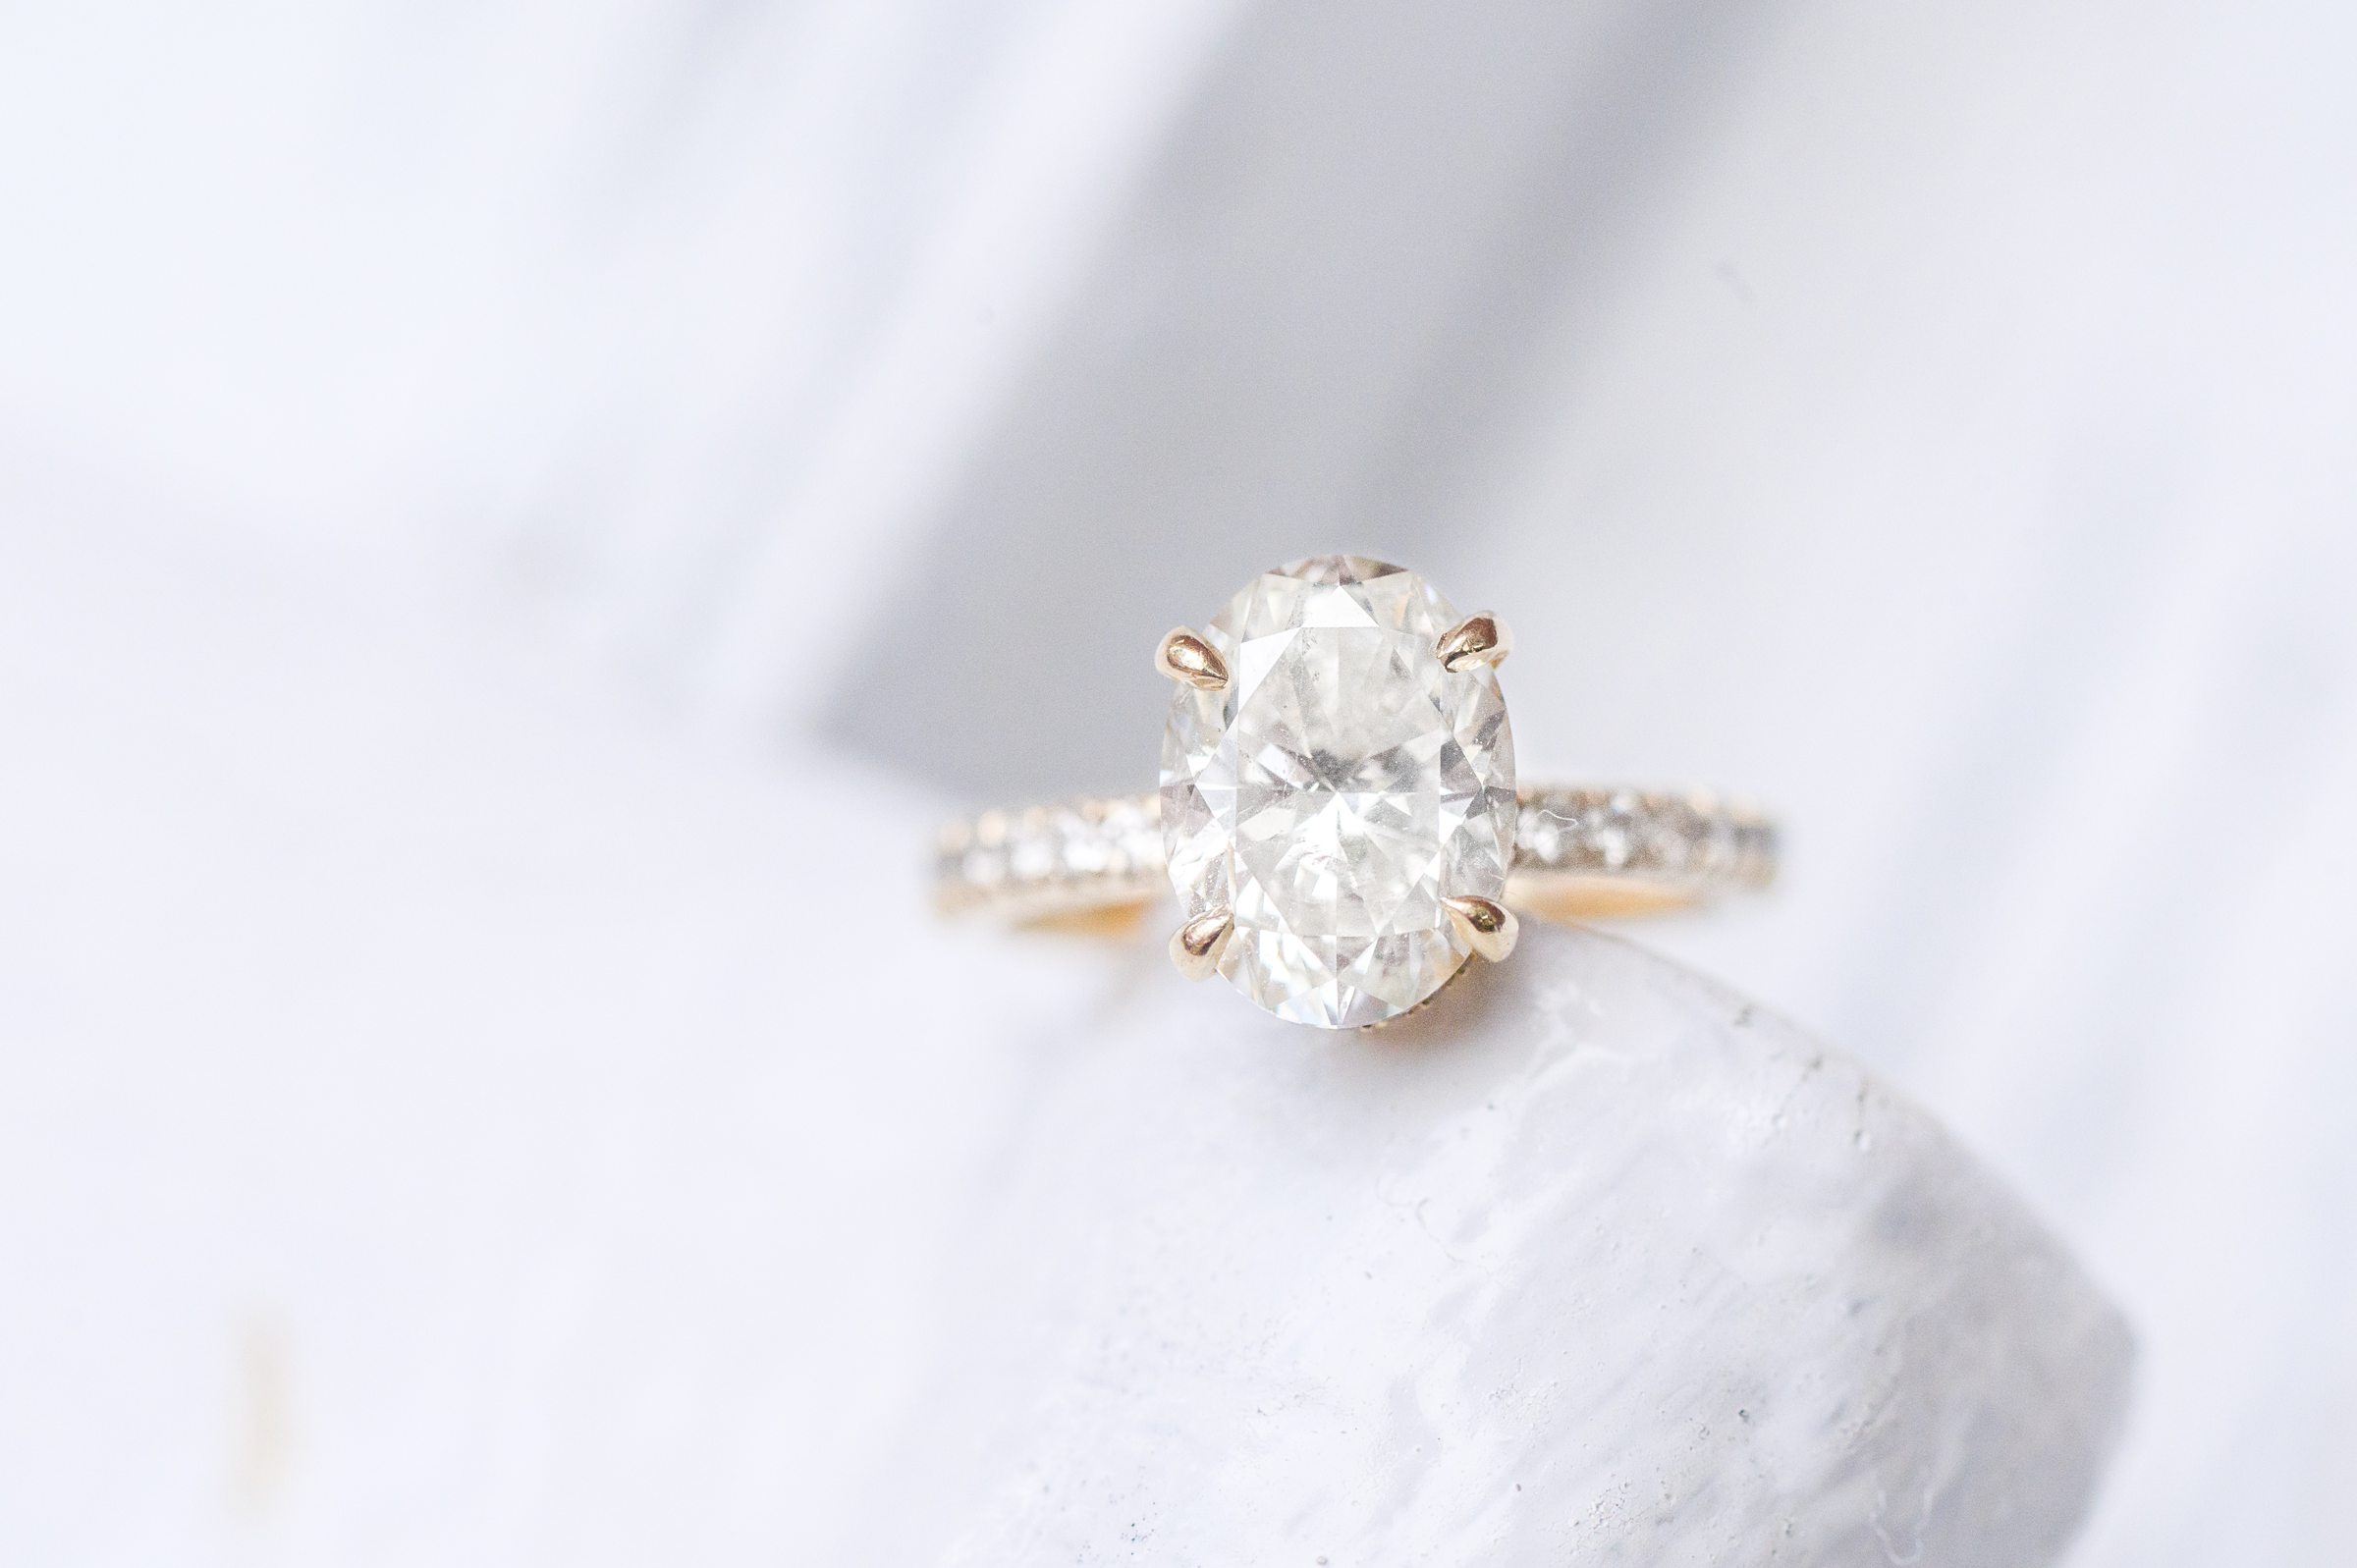 Bride's oval cut diamond engagement ring on a white background during Fells Point engagement session photographed by Baltimore wedding photographer Cait Kramer